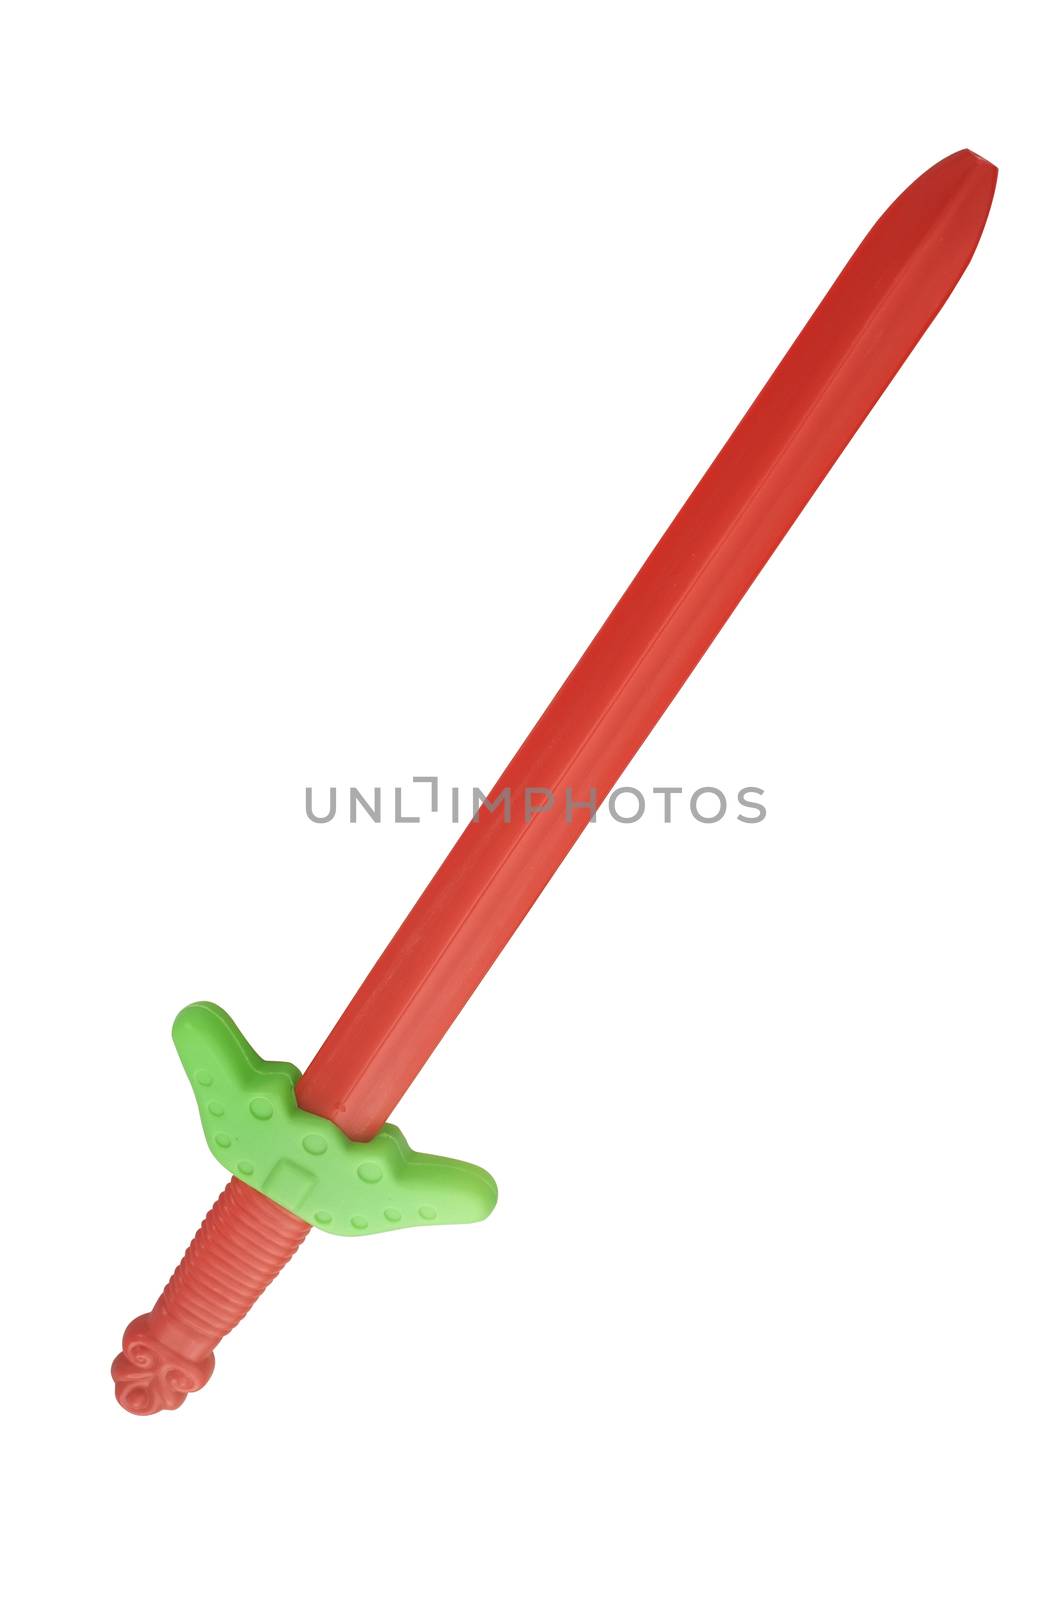 Red plastic toy sword isolated on a white background